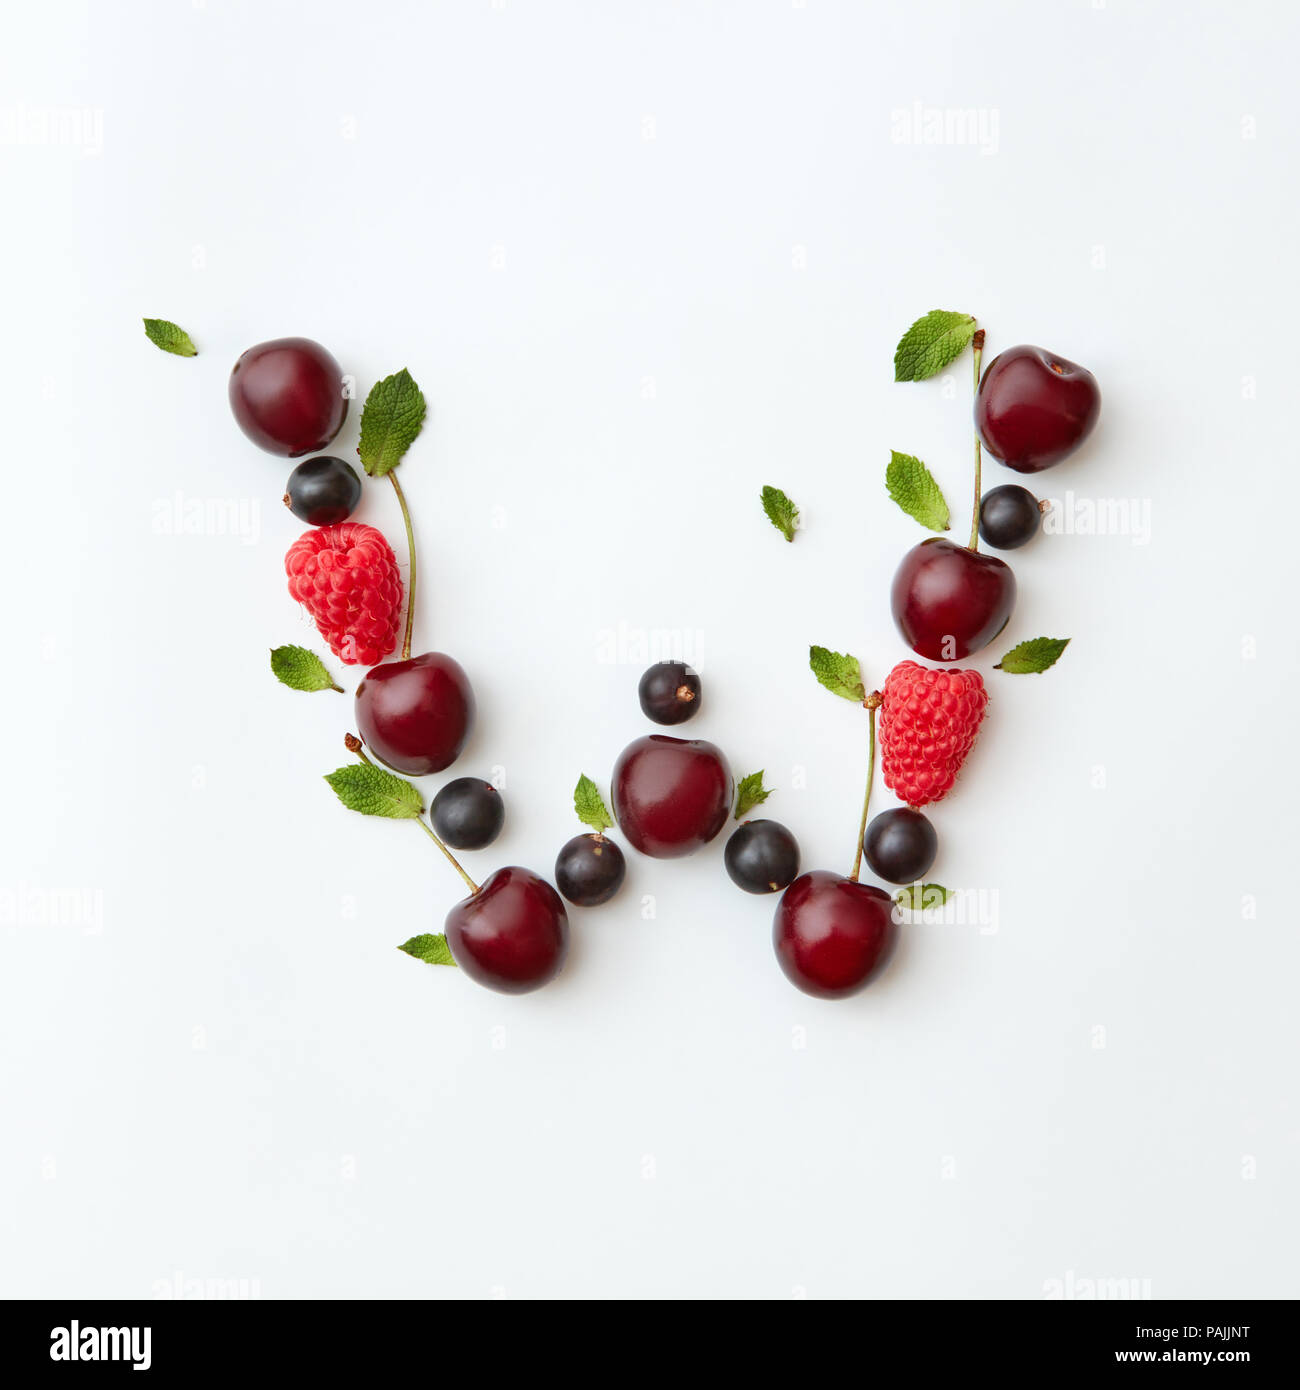 Summer berries pattern of letter W english alphabet from natural ripe berries - black currant, cherries, raspberry, mint leaf isolated on a white background. Stock Photo